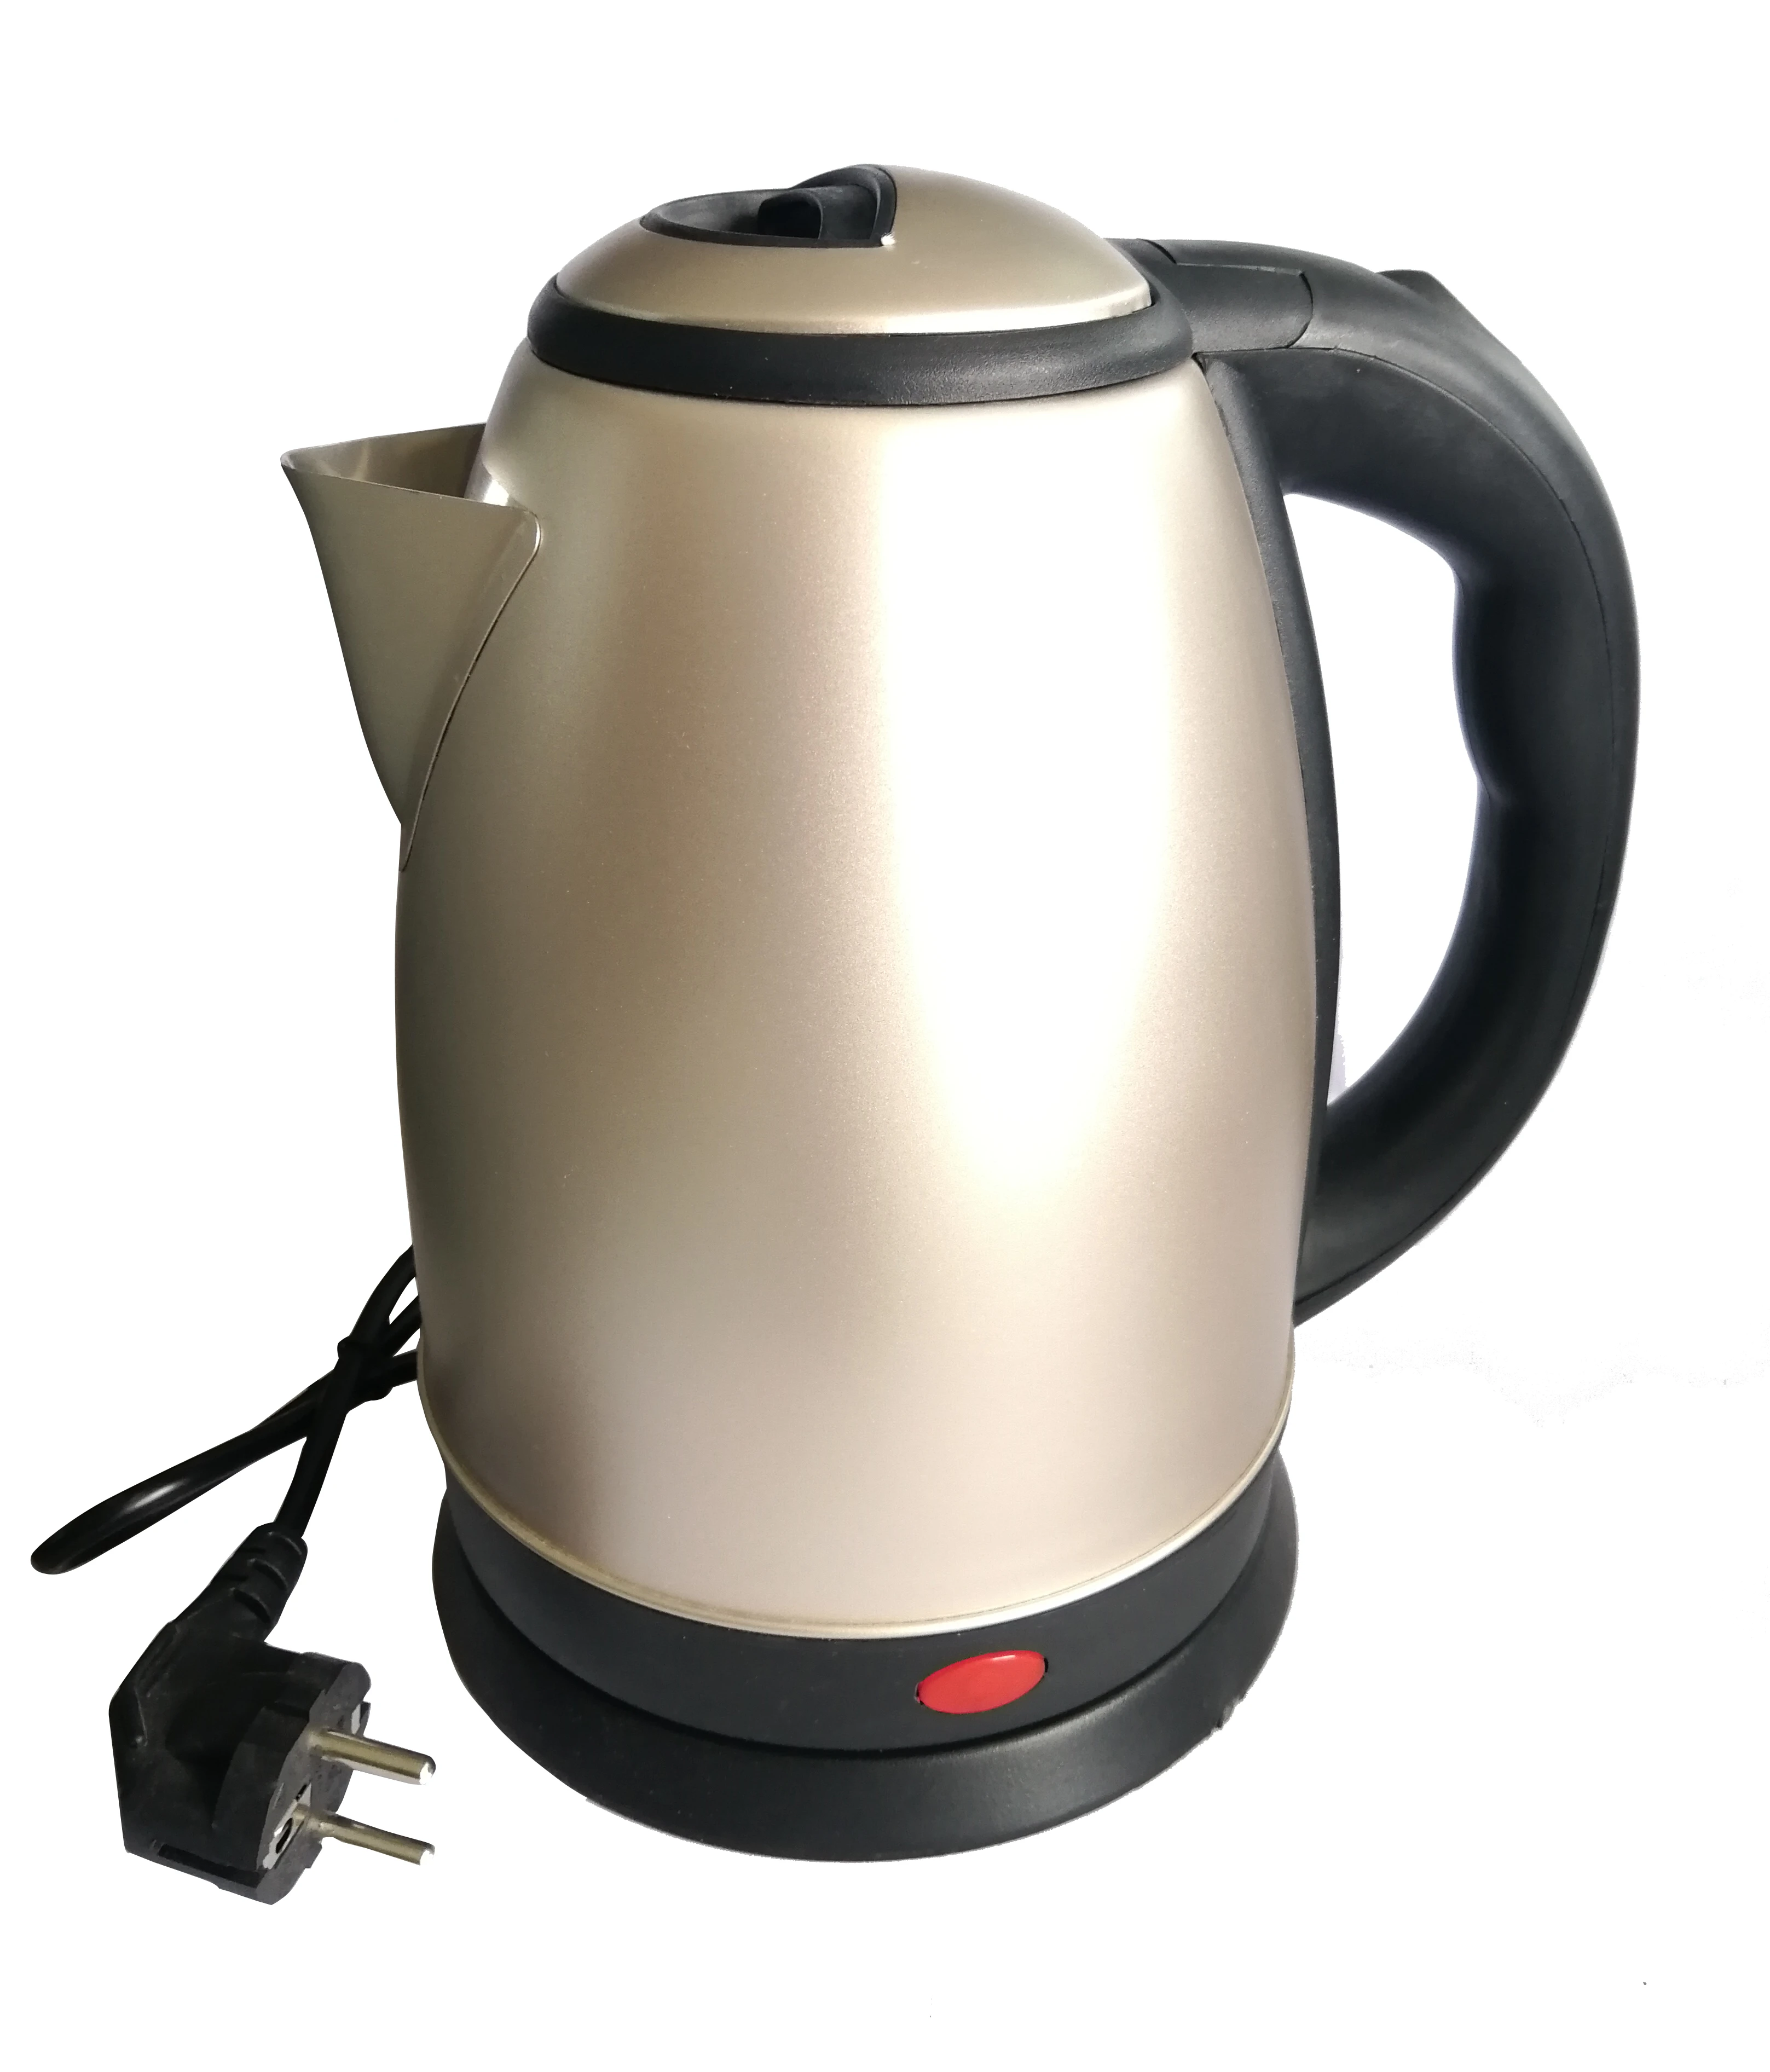 Hot Sales1.5L 1.8L 2.0L Liter Colorful High quality  Stainless Steel kettle Electric kettle  Stainless Steel Water Electric Kett